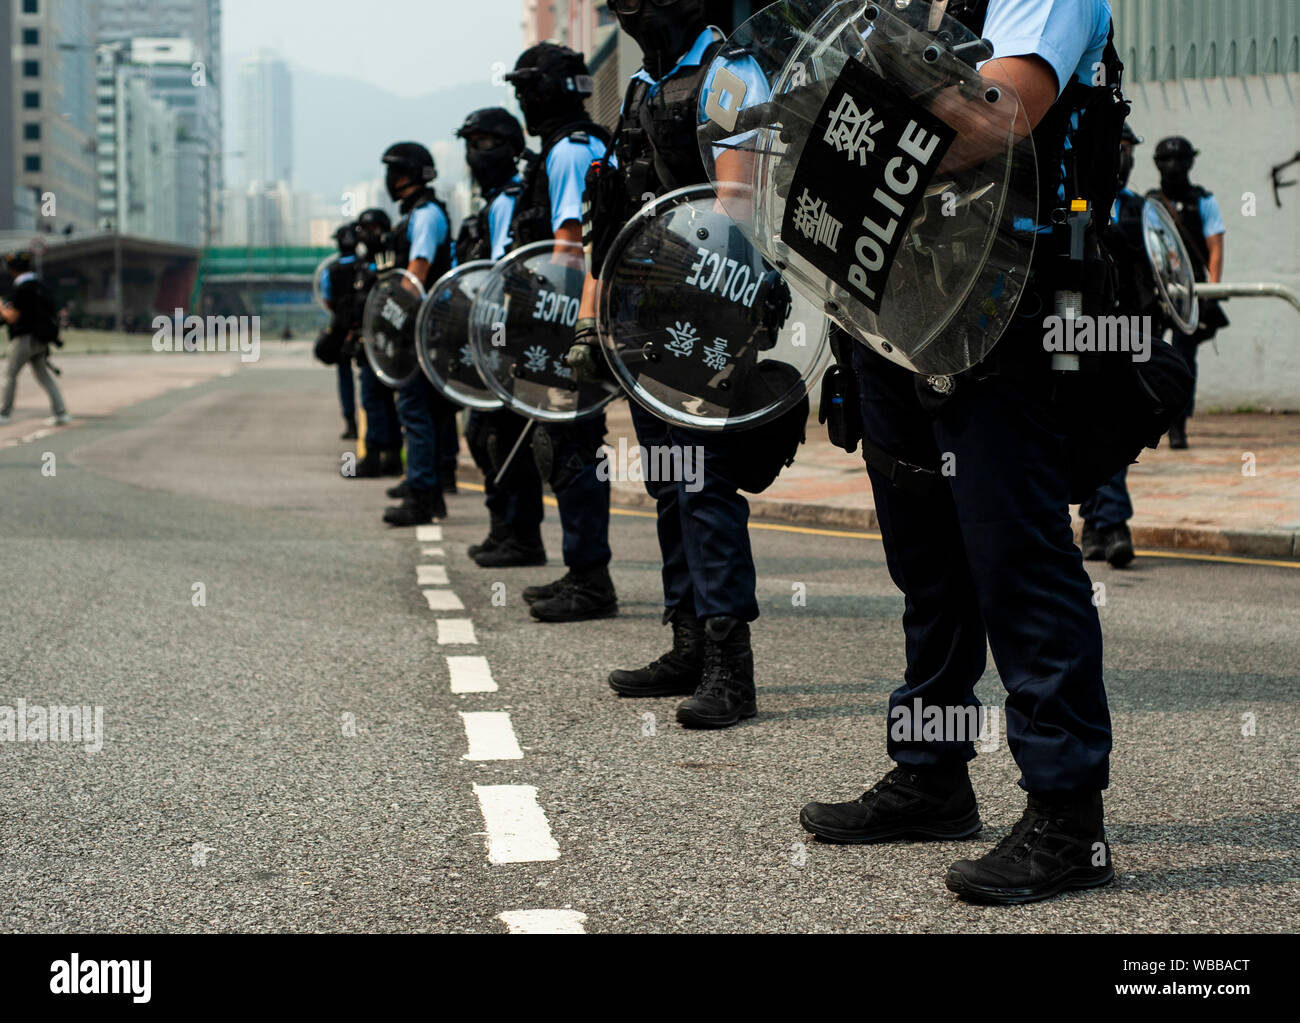 Hong Kong, China. 24th Aug, 2019. Riot police officers stand on guard during the protest in Kwun Tong.Mass demonstrations continues for one more weekend in Hong Kong which began in June 2019 over a now-suspended extradition bill to China. Credit: SOPA Images Limited/Alamy Live News Stock Photo